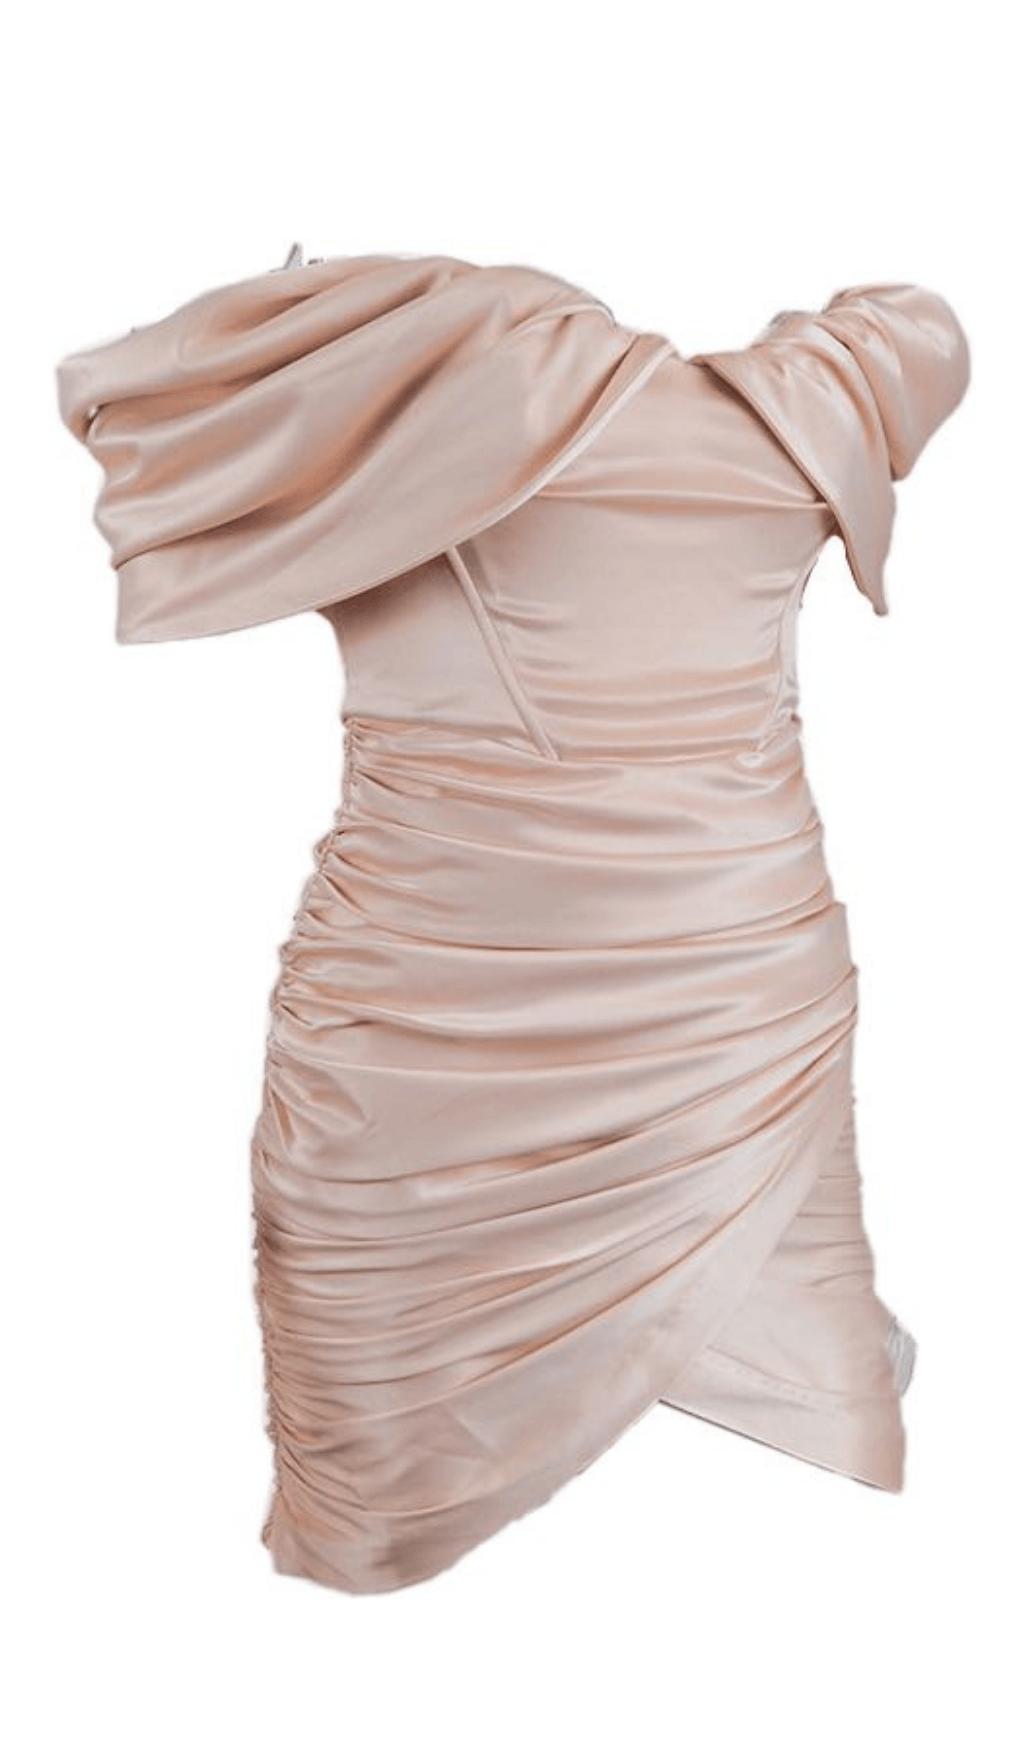 TUBE TOP PLEATED SKIRT IN PINK